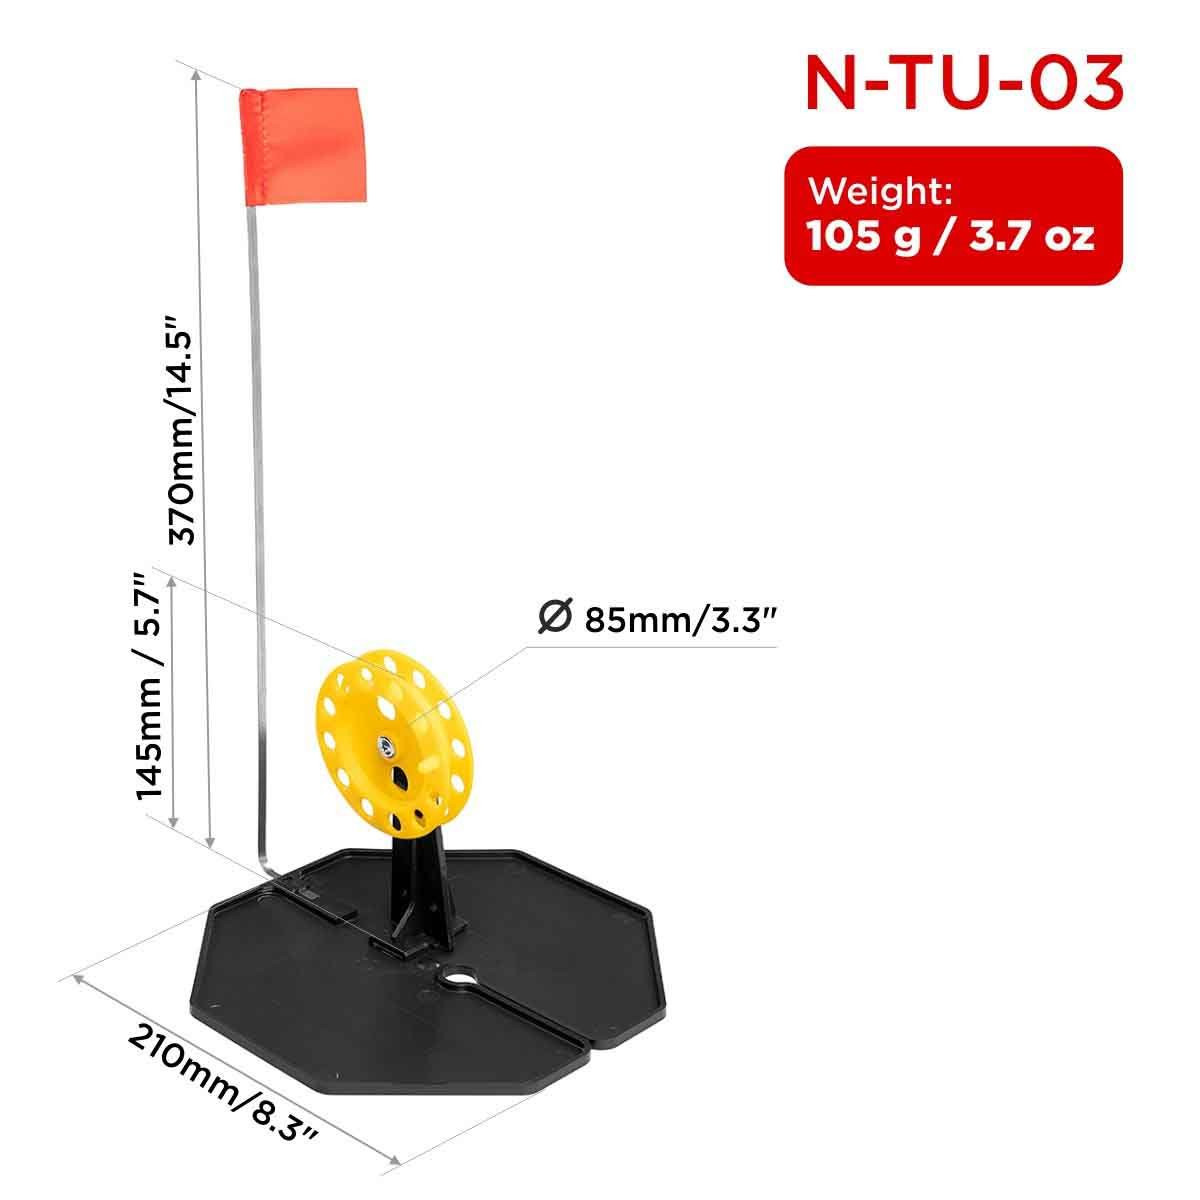 Tip-up Pop-Up Integrated Hole-Cover Easy to Clip N-Tu-03 weighs 3.7 oz, the base is 8.3 inches long, the flag shaft is 14.5 inches, the spool diameter is 3.3 inches and its height is 5.7 inches